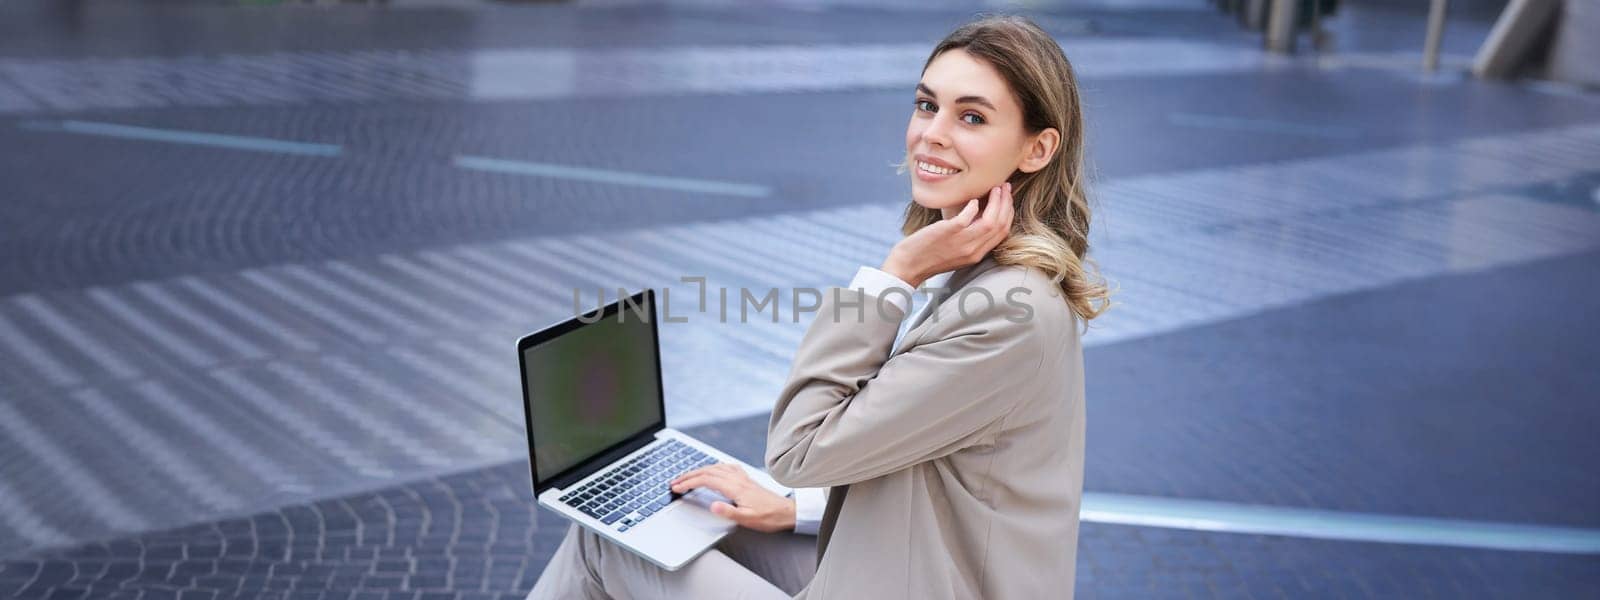 Young digital nomad, businesswoman sitting with laptop in city centre. Office worker using computer outdoors.